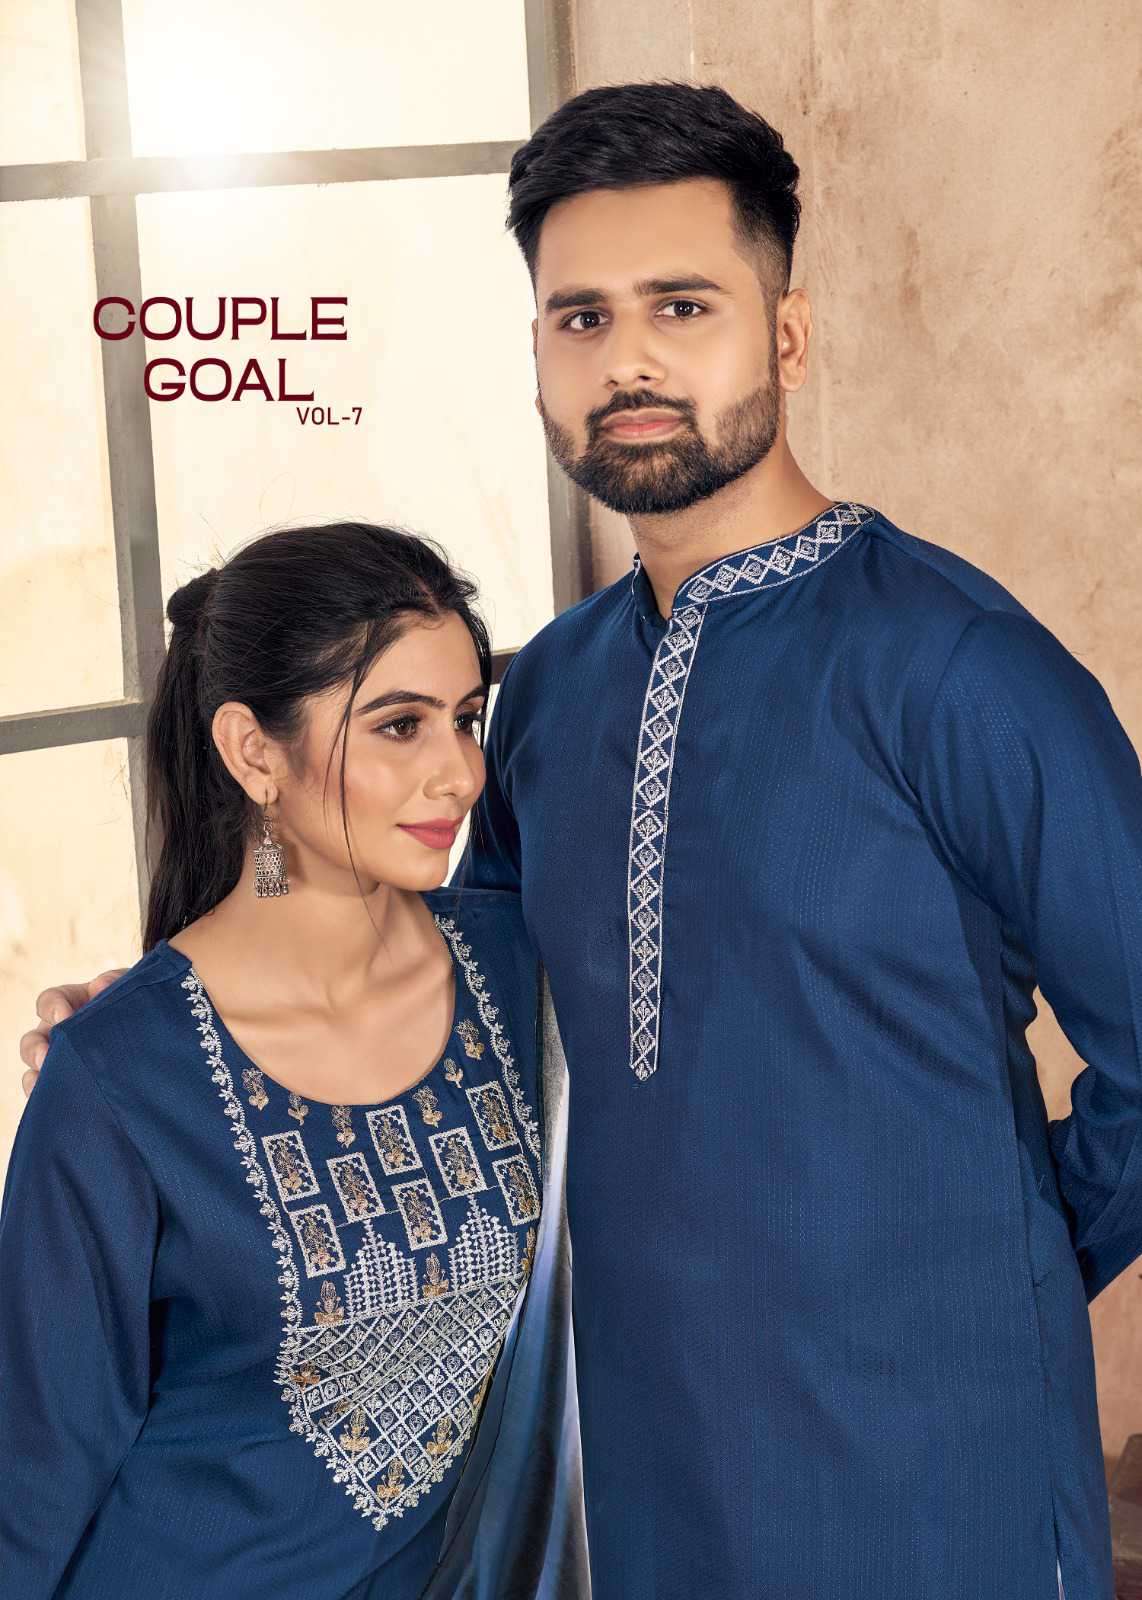 Banwery Couple Goal Vol 7 Couple Wear Matching Outfit Online Sales Dealers